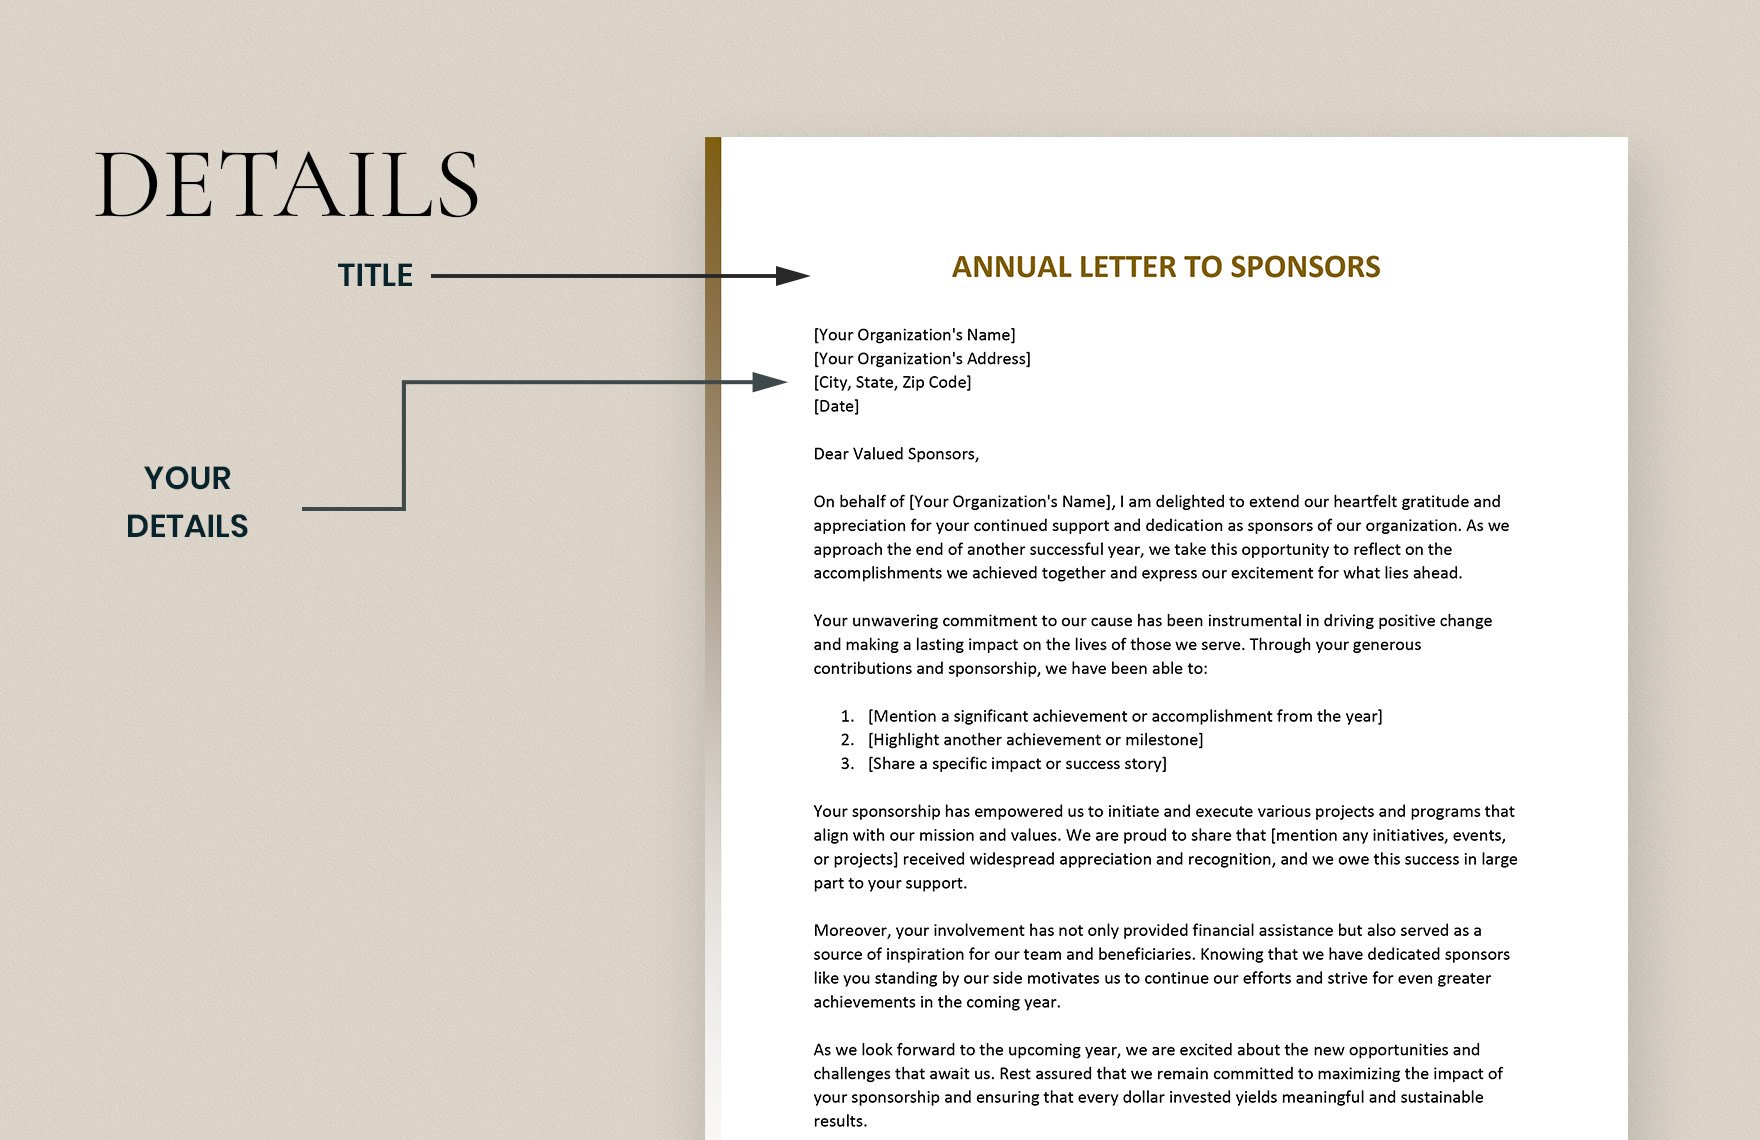 Annual Letter to Sponsors